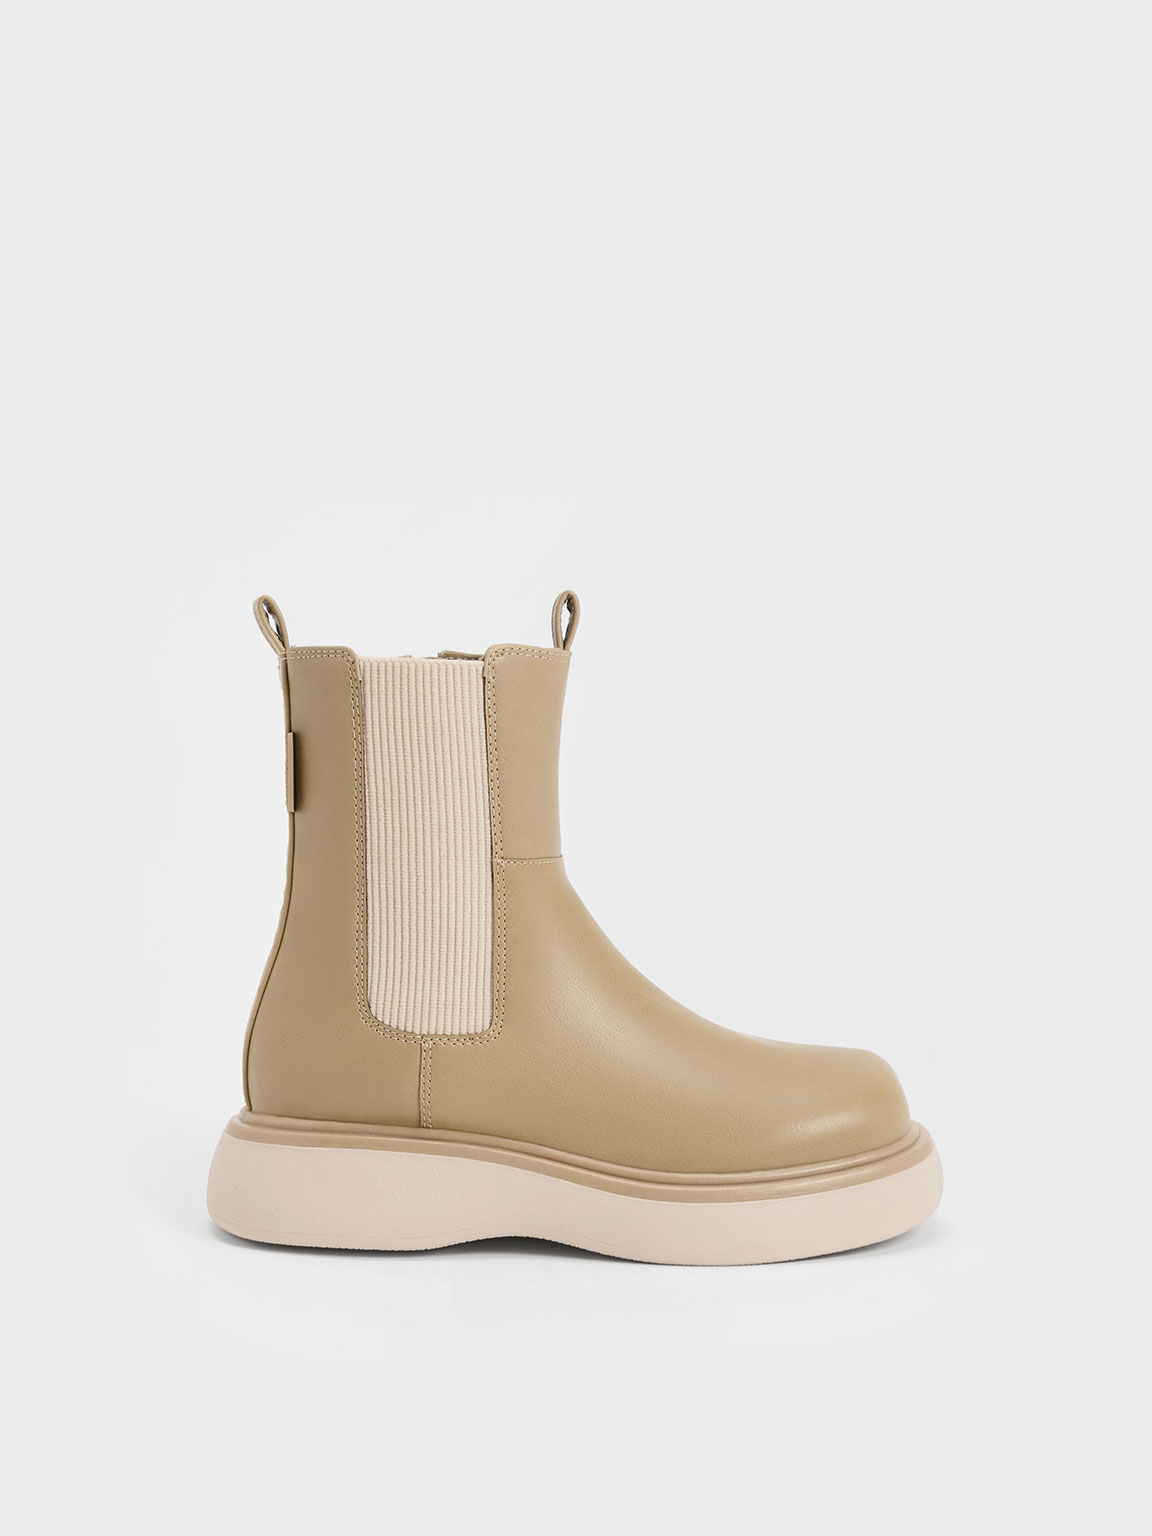 Double Pull Tab Chelsea Boots, Sand, hi-res